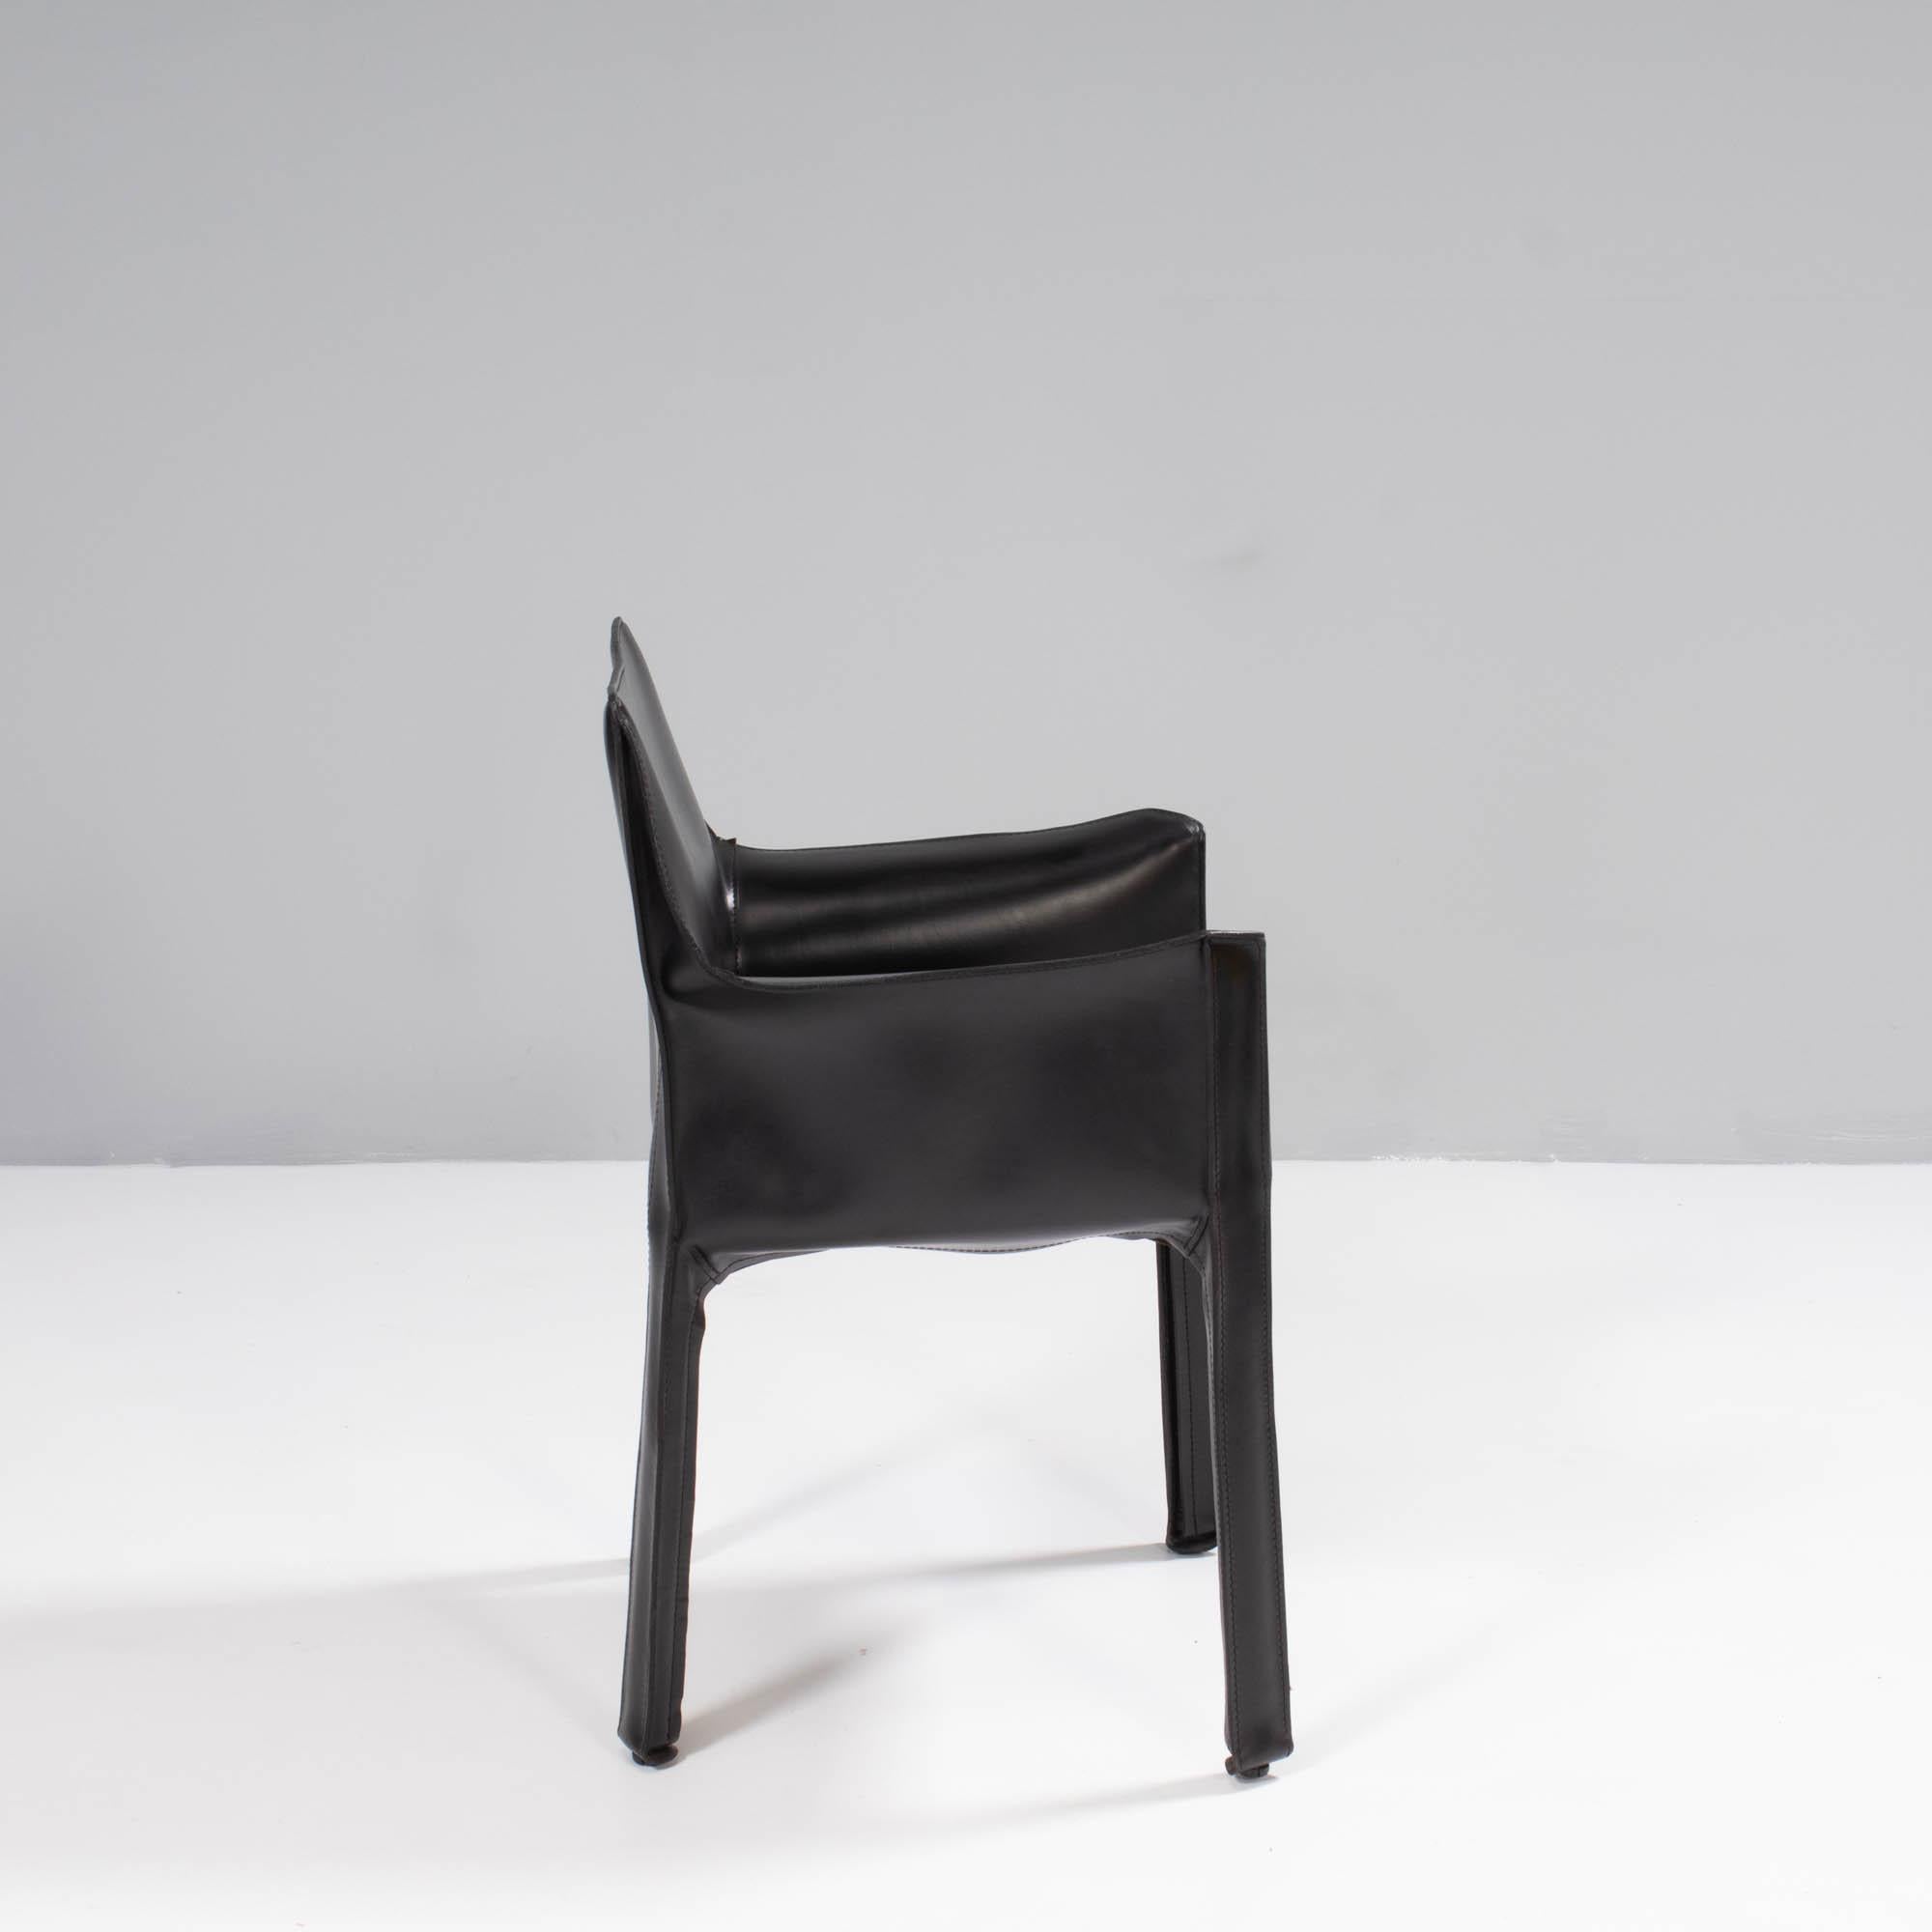 Cassina by Mario Bellini 'Cab' Black Leather Carver Dining Chairs, Set of Four 1